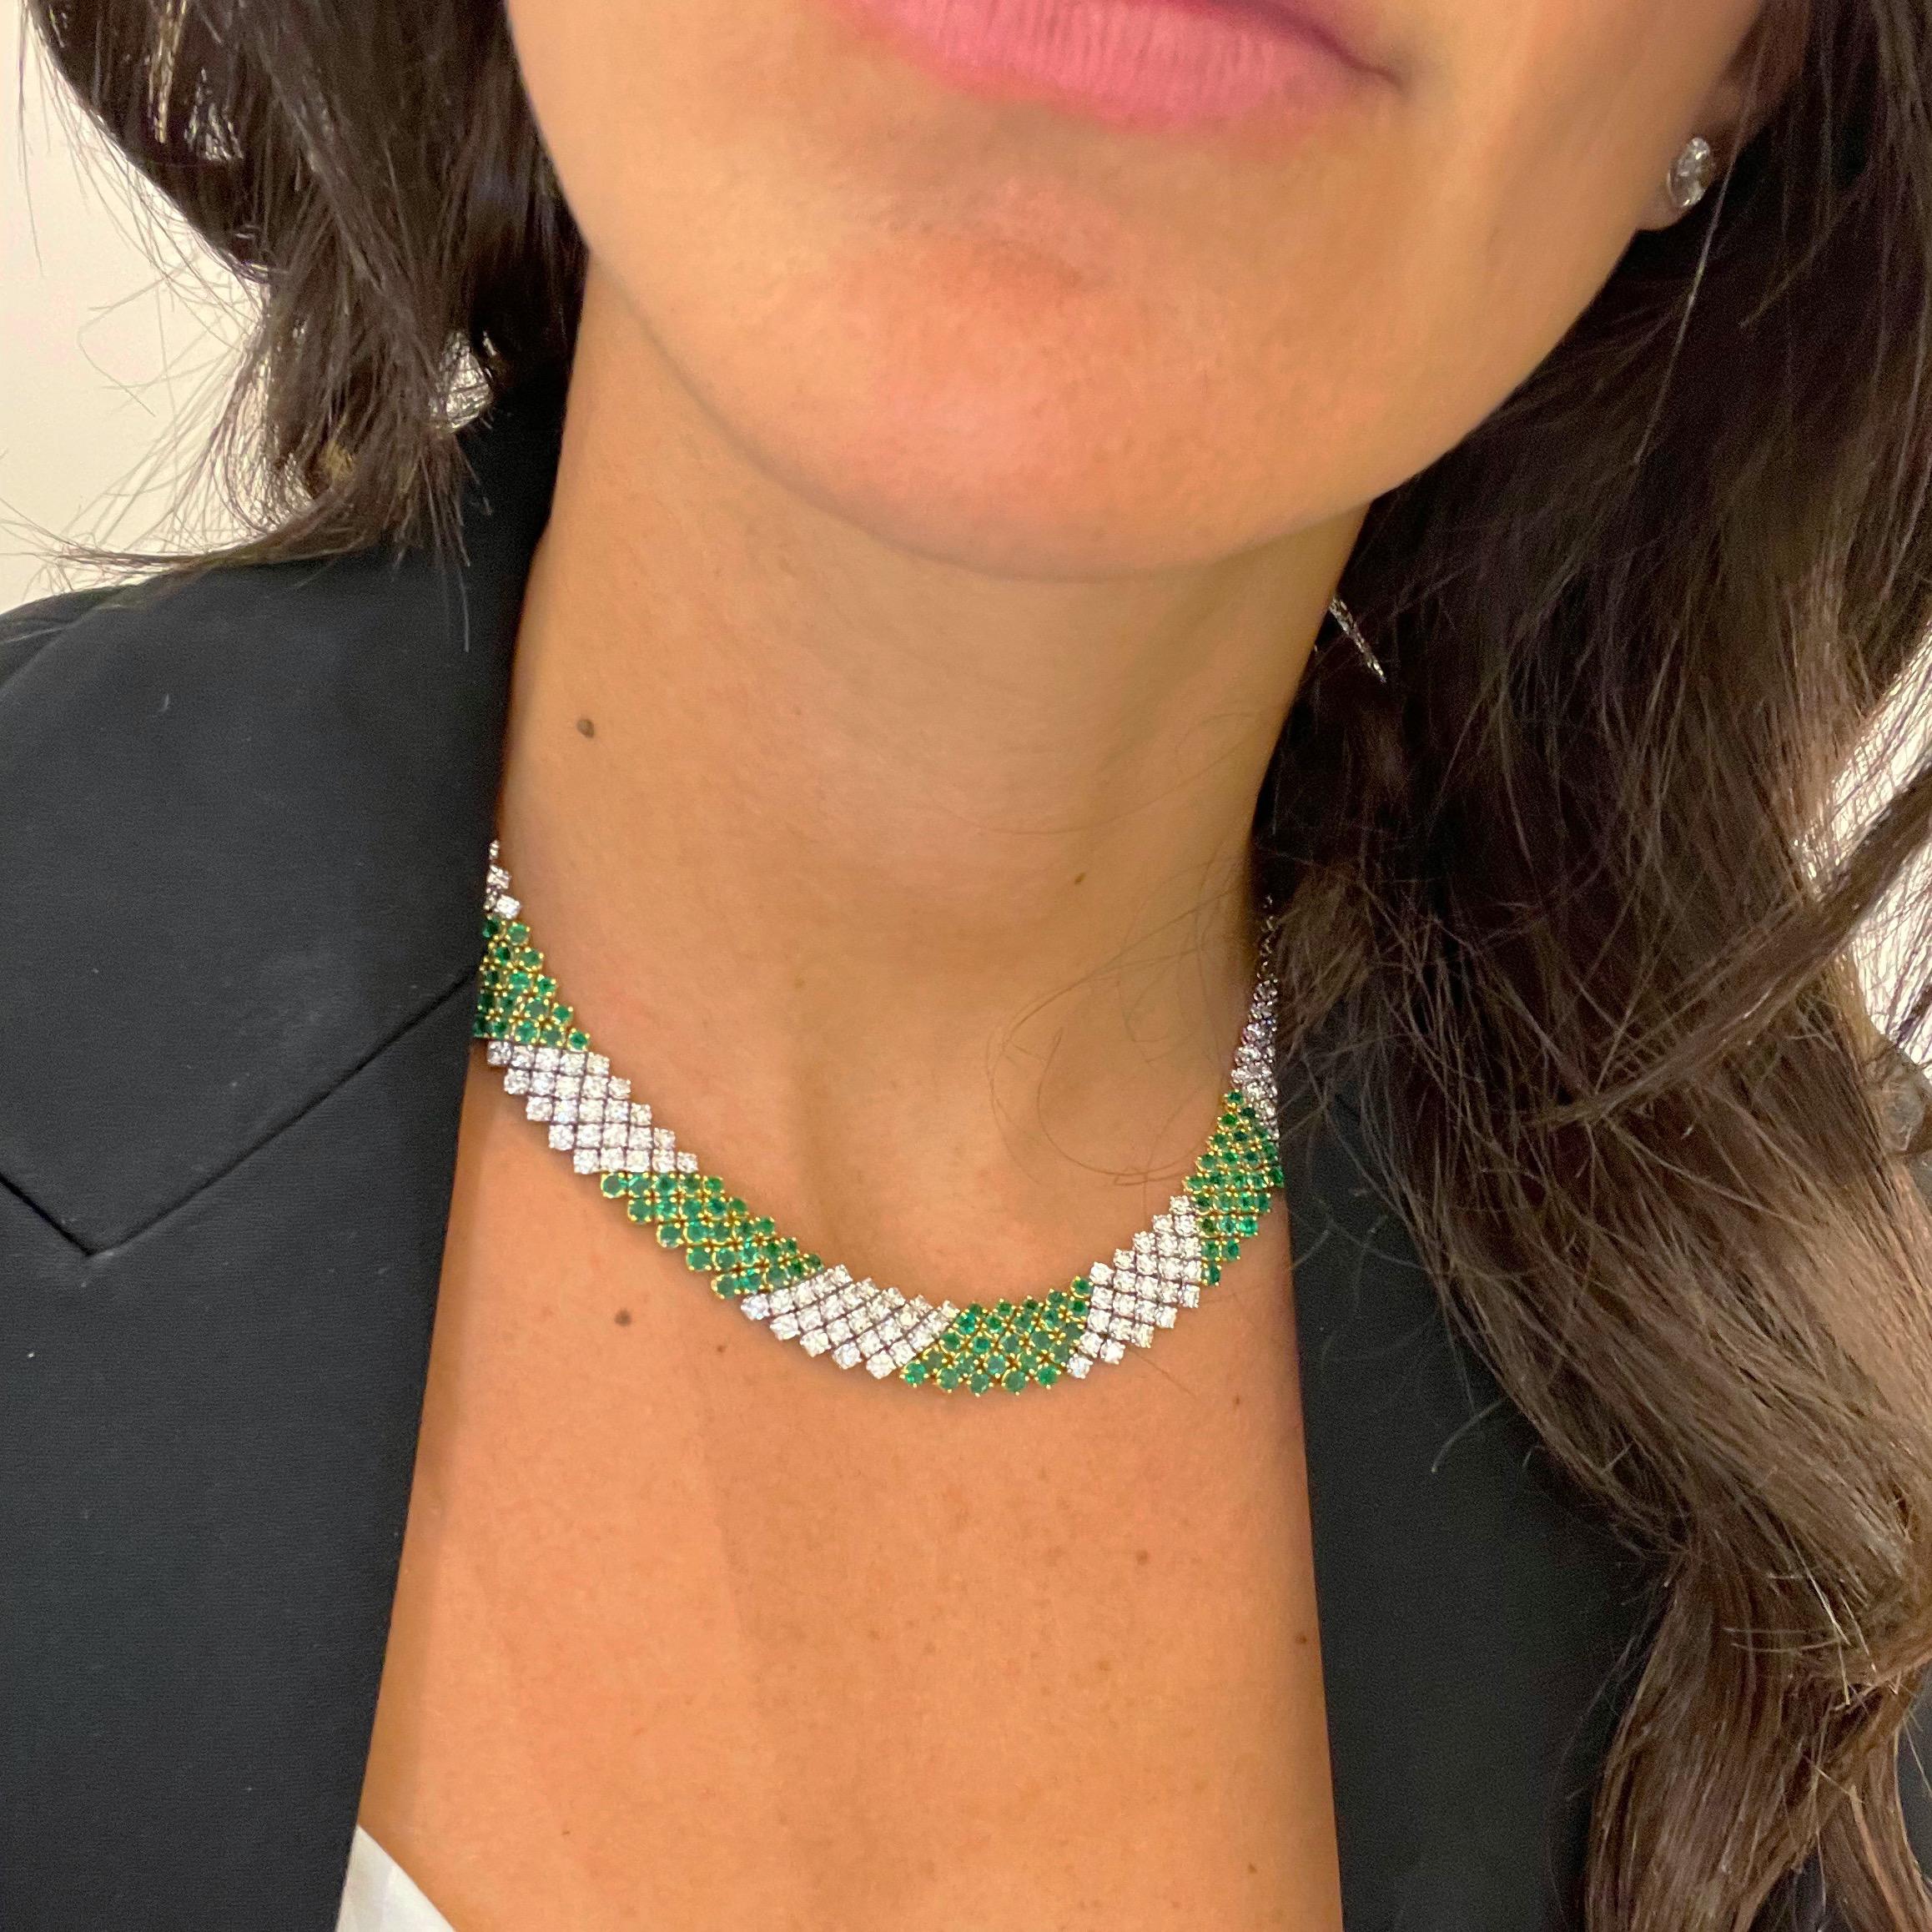 This lovely designed collar necklace by Crivelli is entirely set with 5 rows of round brilliant Diamonds and Emeralds. The alternating stones and the flexibility of the setting will lay beautifully around the neck. The necklace measures 16